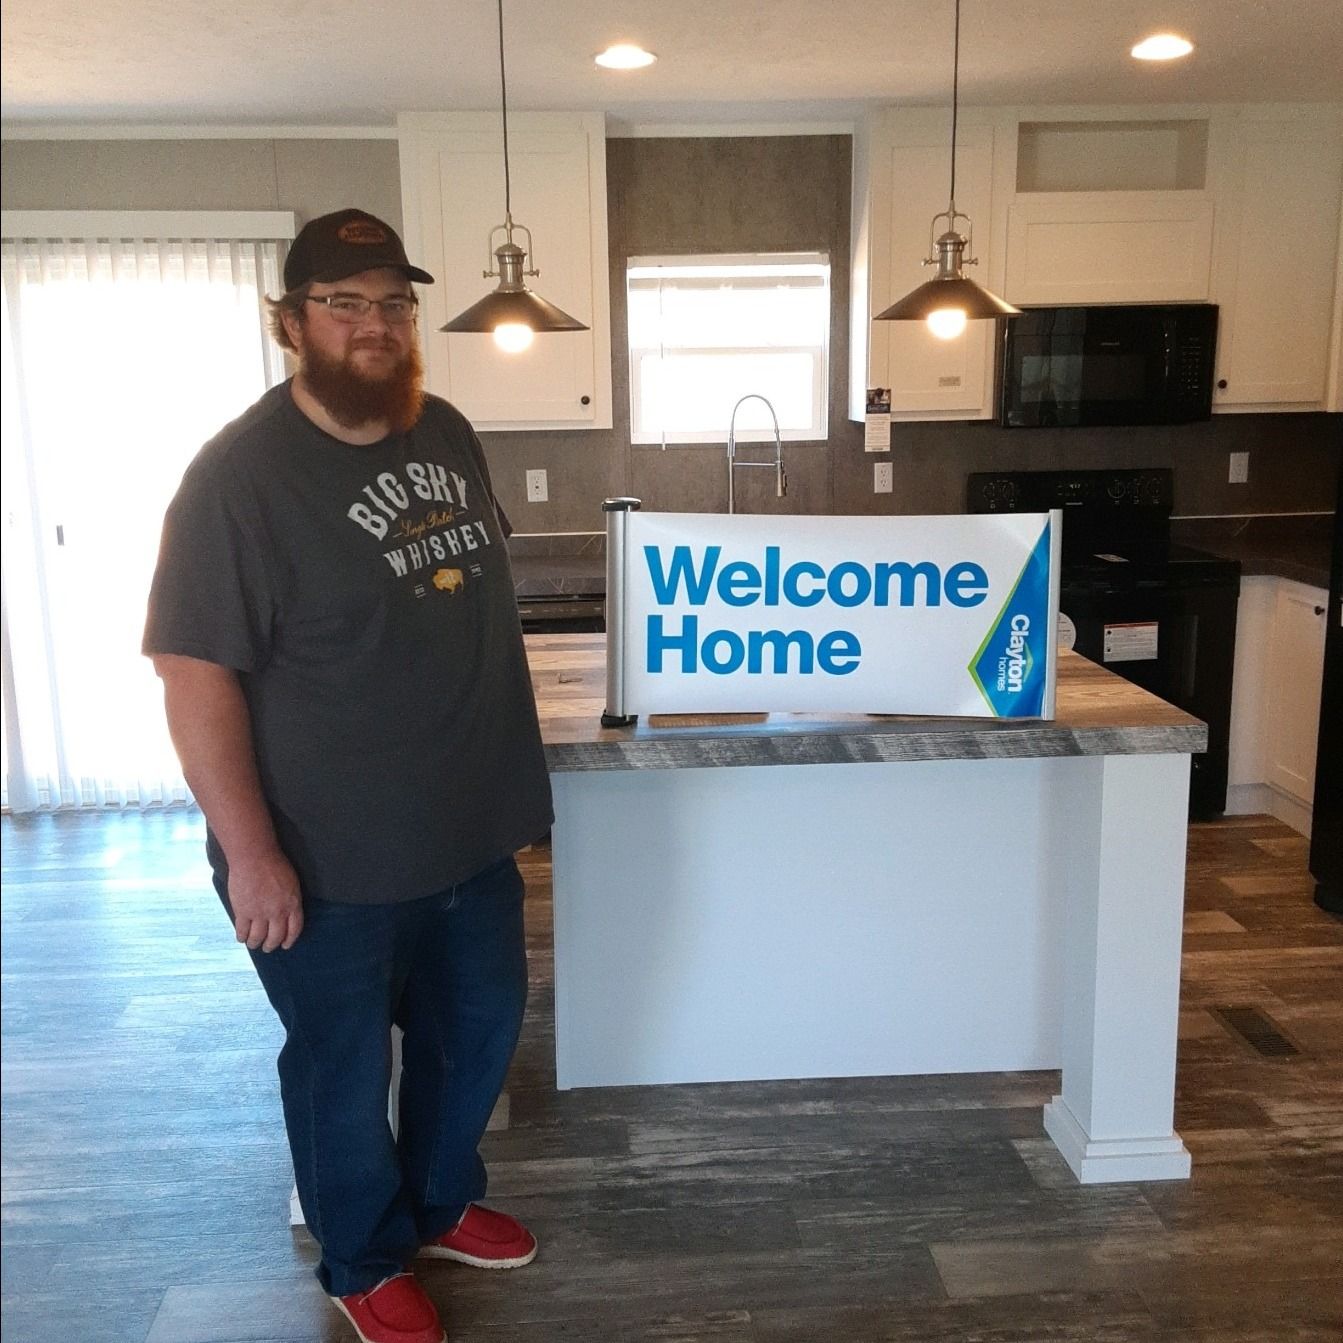 DEAN F. welcome home image